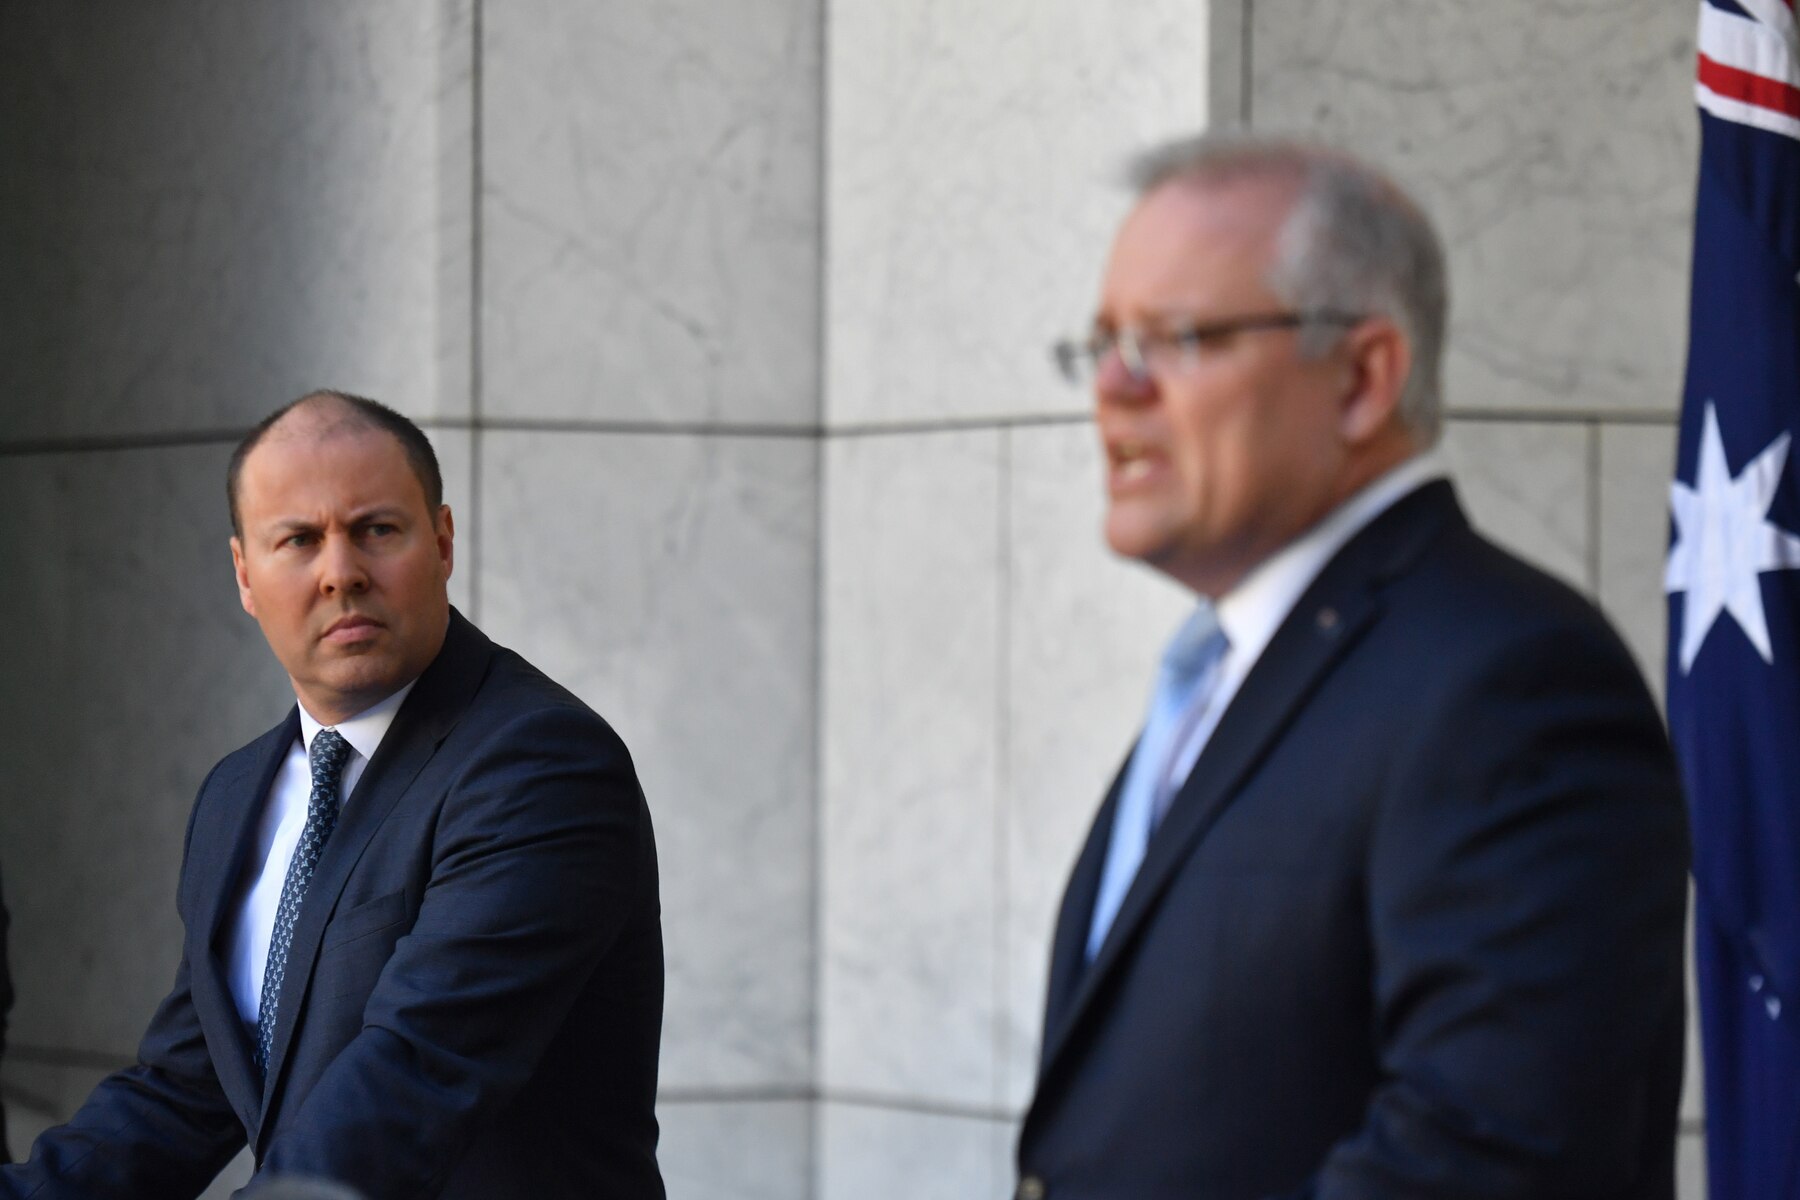 Treasurer Josh Frydenberg and Prime Minister Scott Morrison at a press conference to announce the government's coronavirus stimulus package at Parliament House in Canberra, Sunday, March 22, 2020.